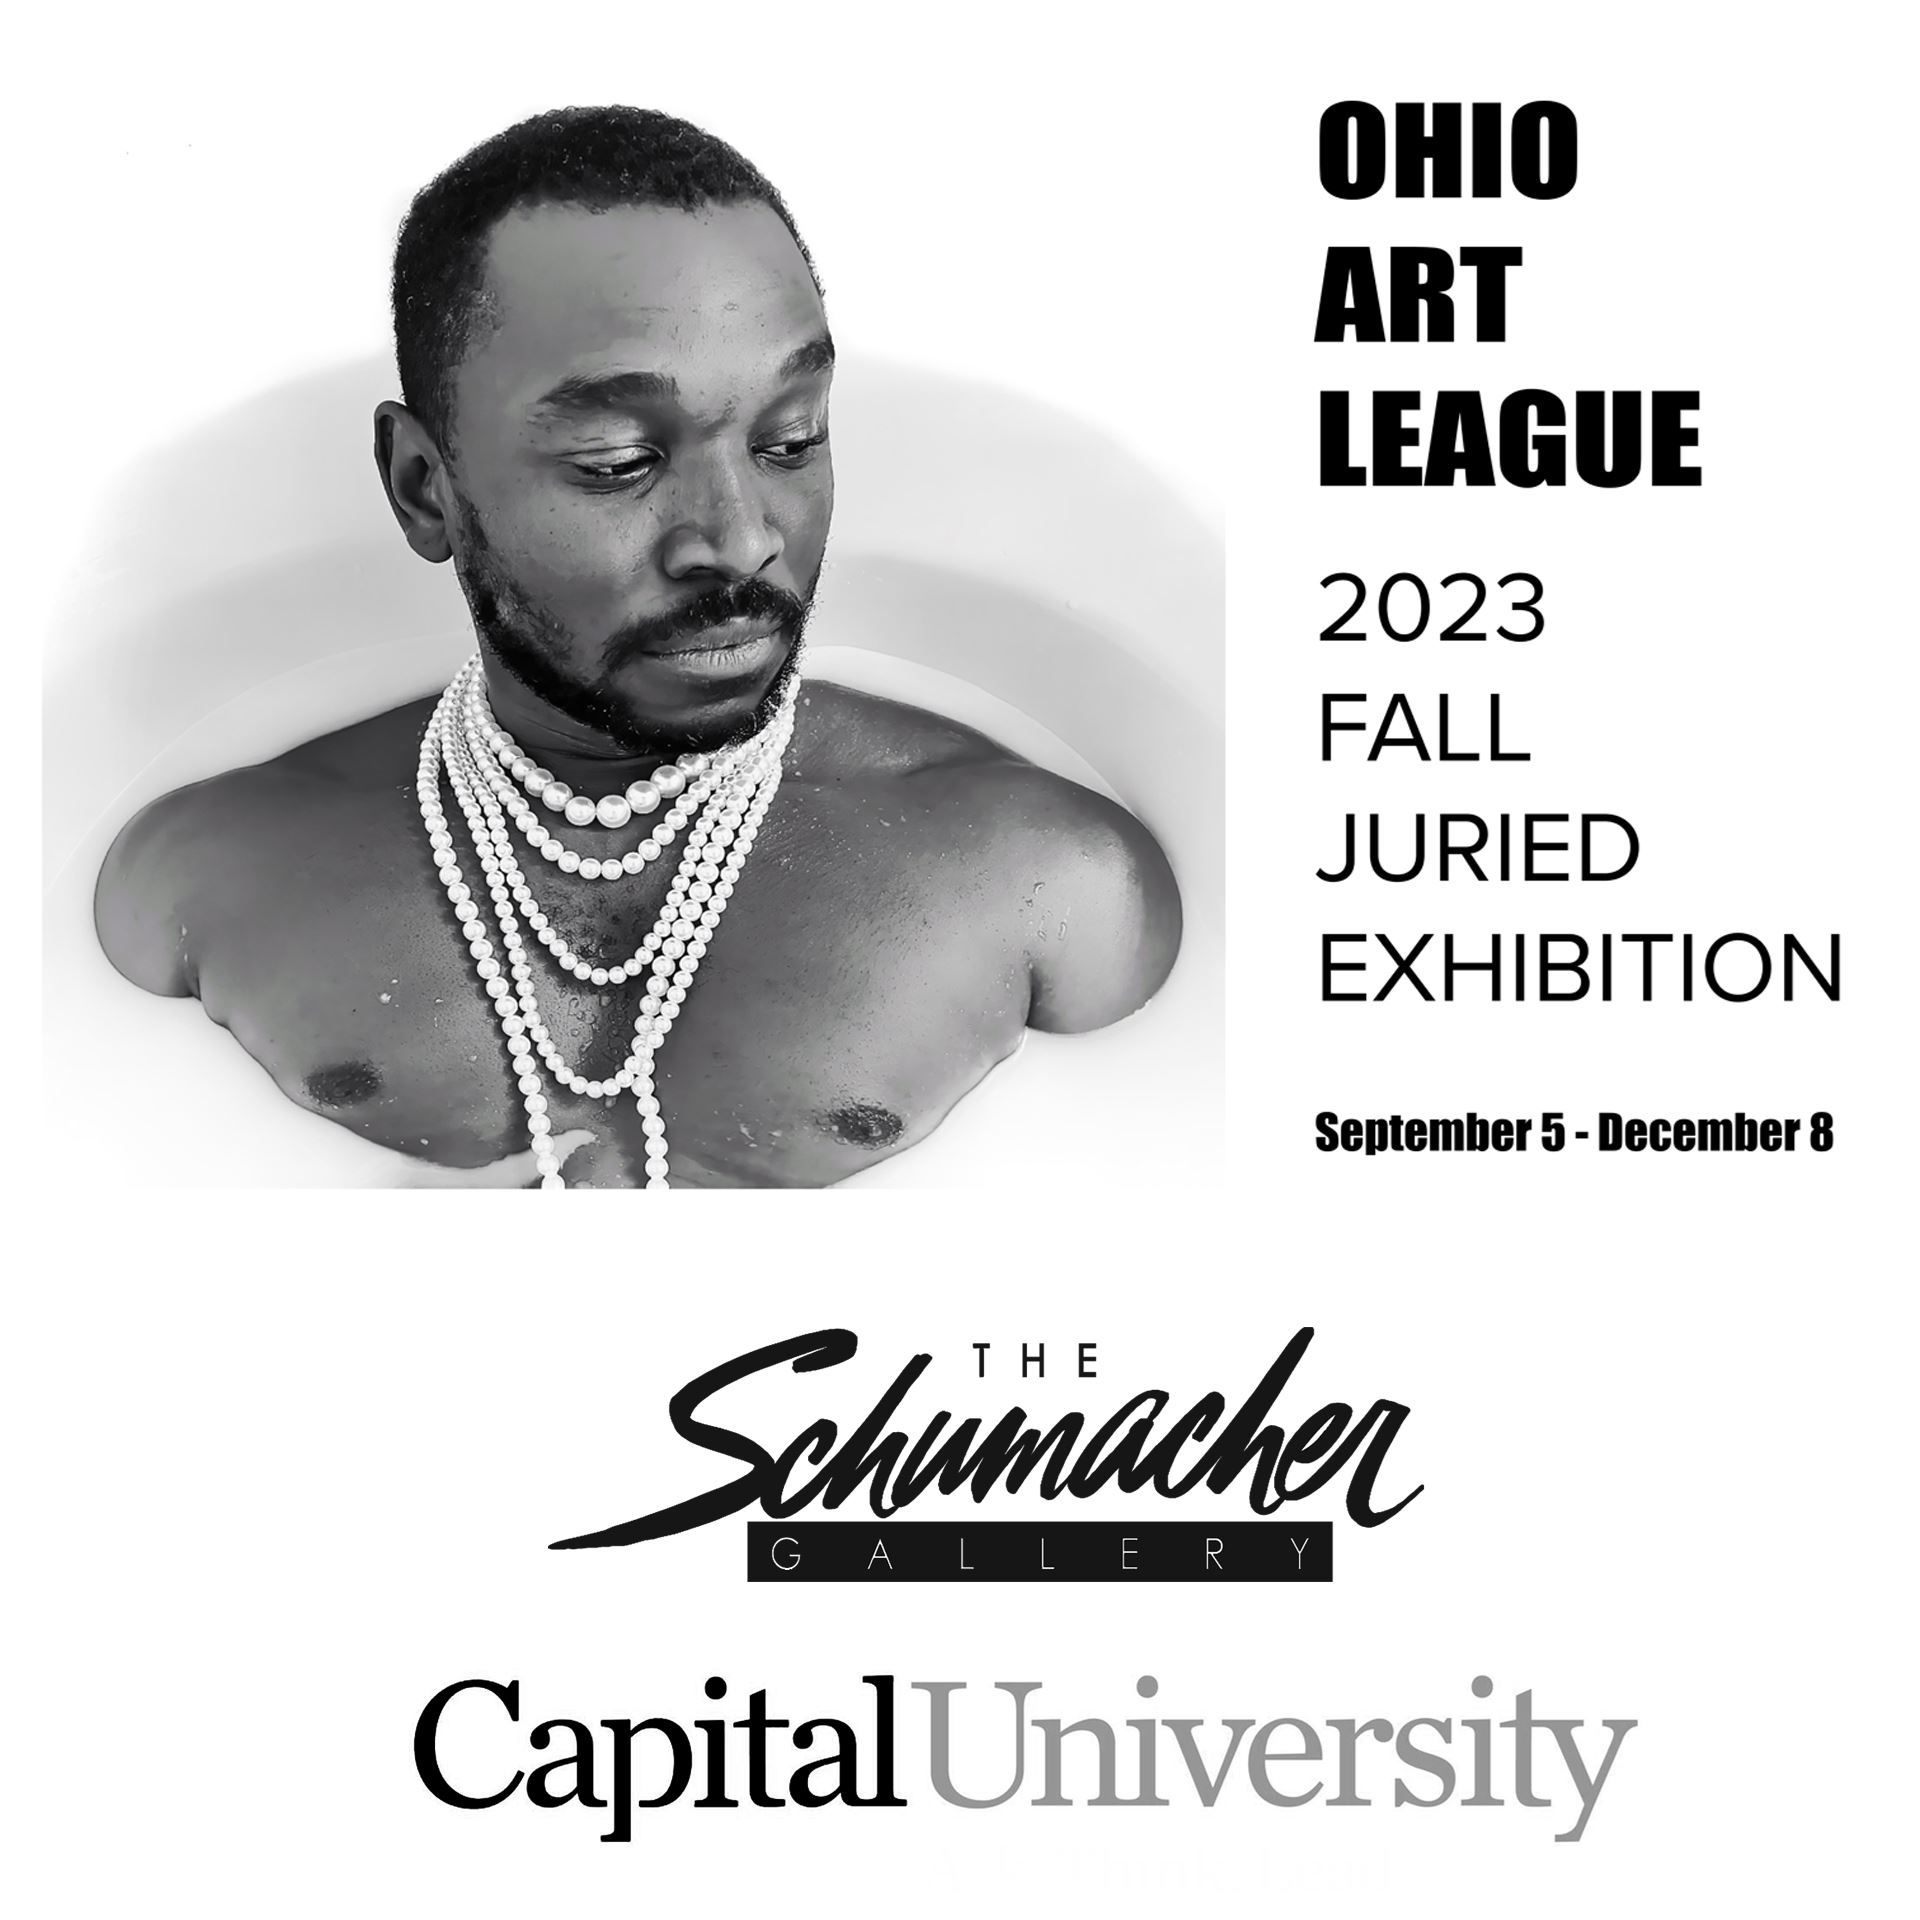 Log for the Ohio Art League 2023 Fall Juried Exhibition at the Schumacher Gallery